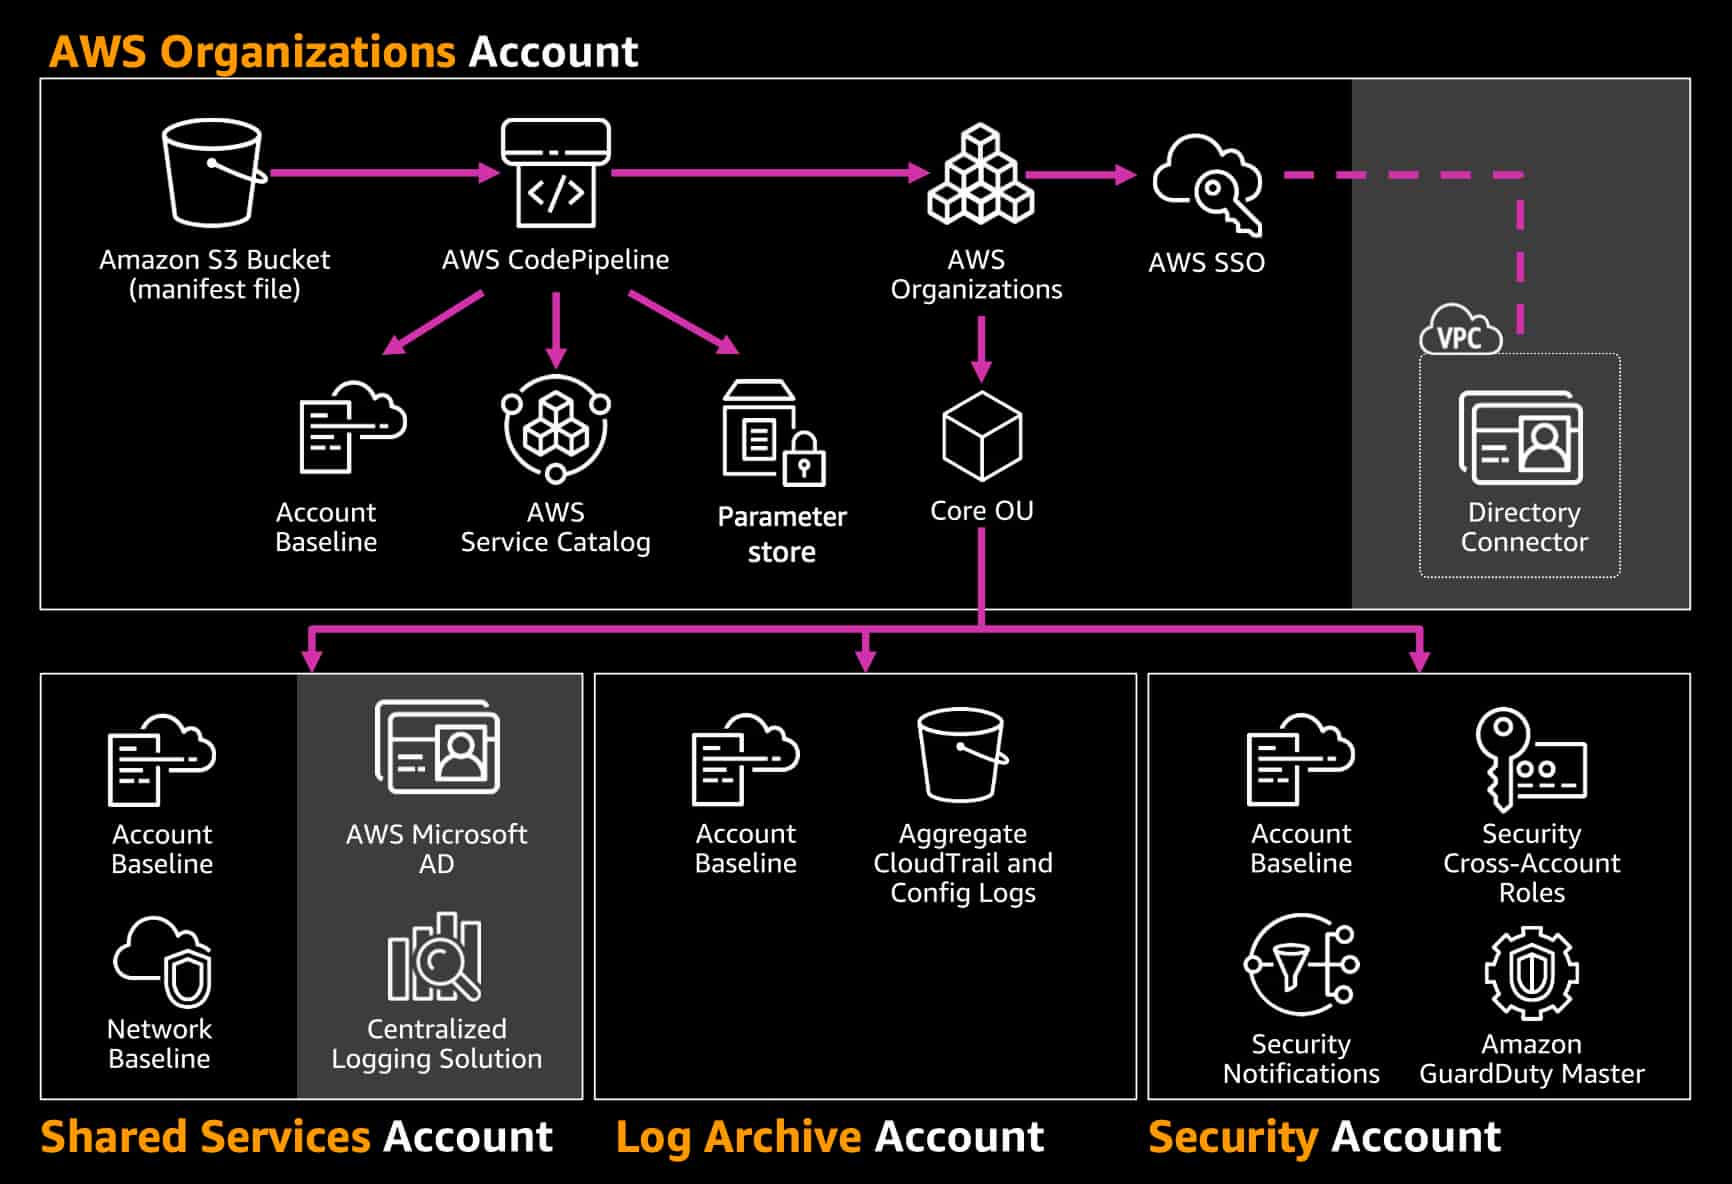 How to automate the creation of multiple accounts in AWS Control Tower